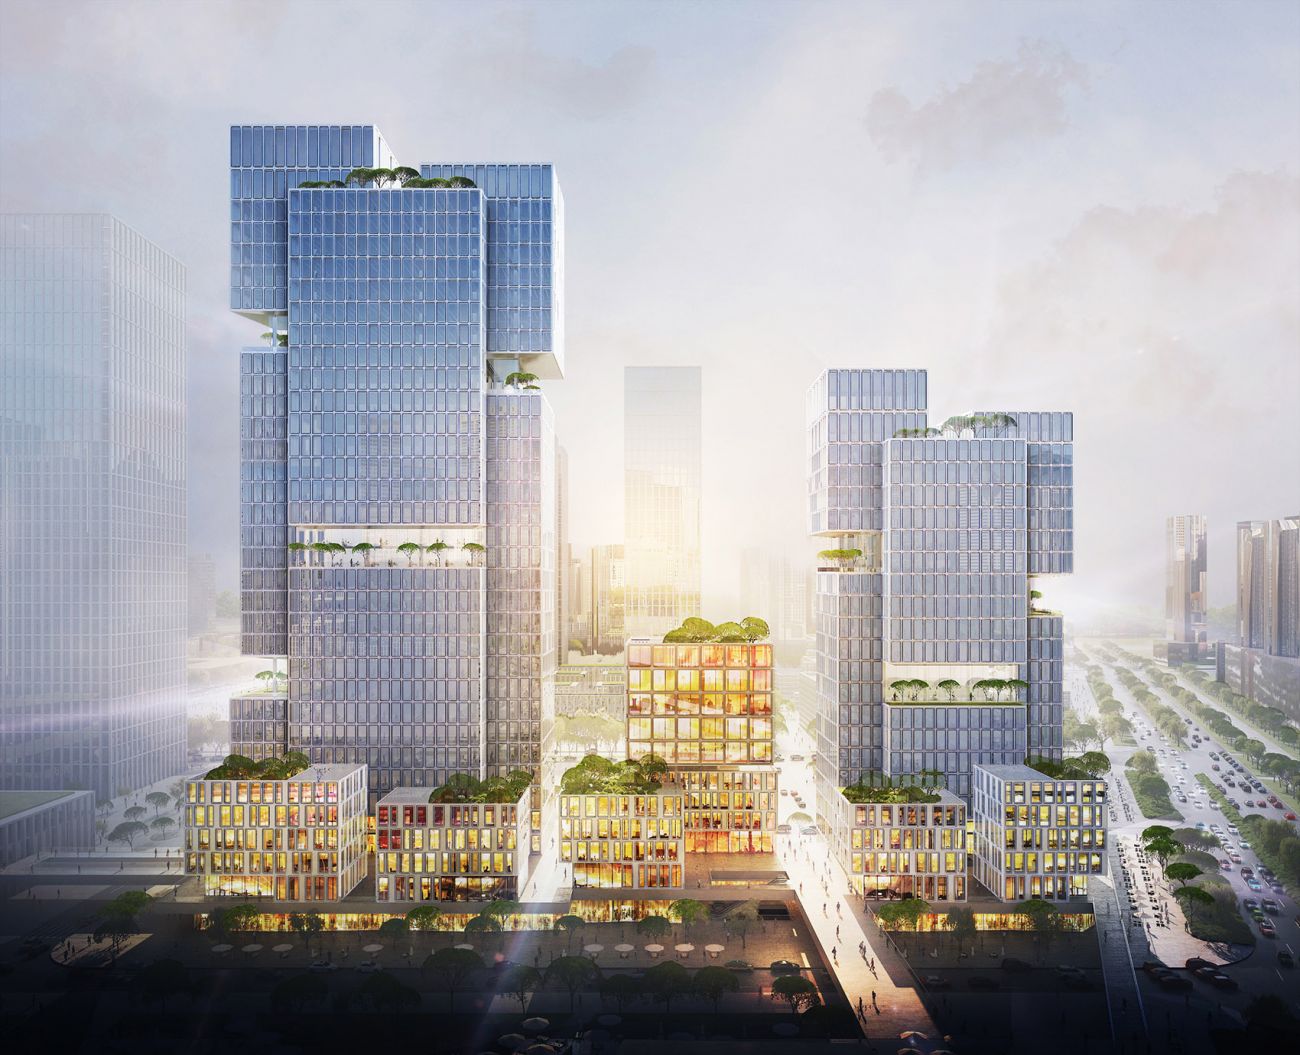 004-vertical-composition-gmp-wins-competition-for-china-telling